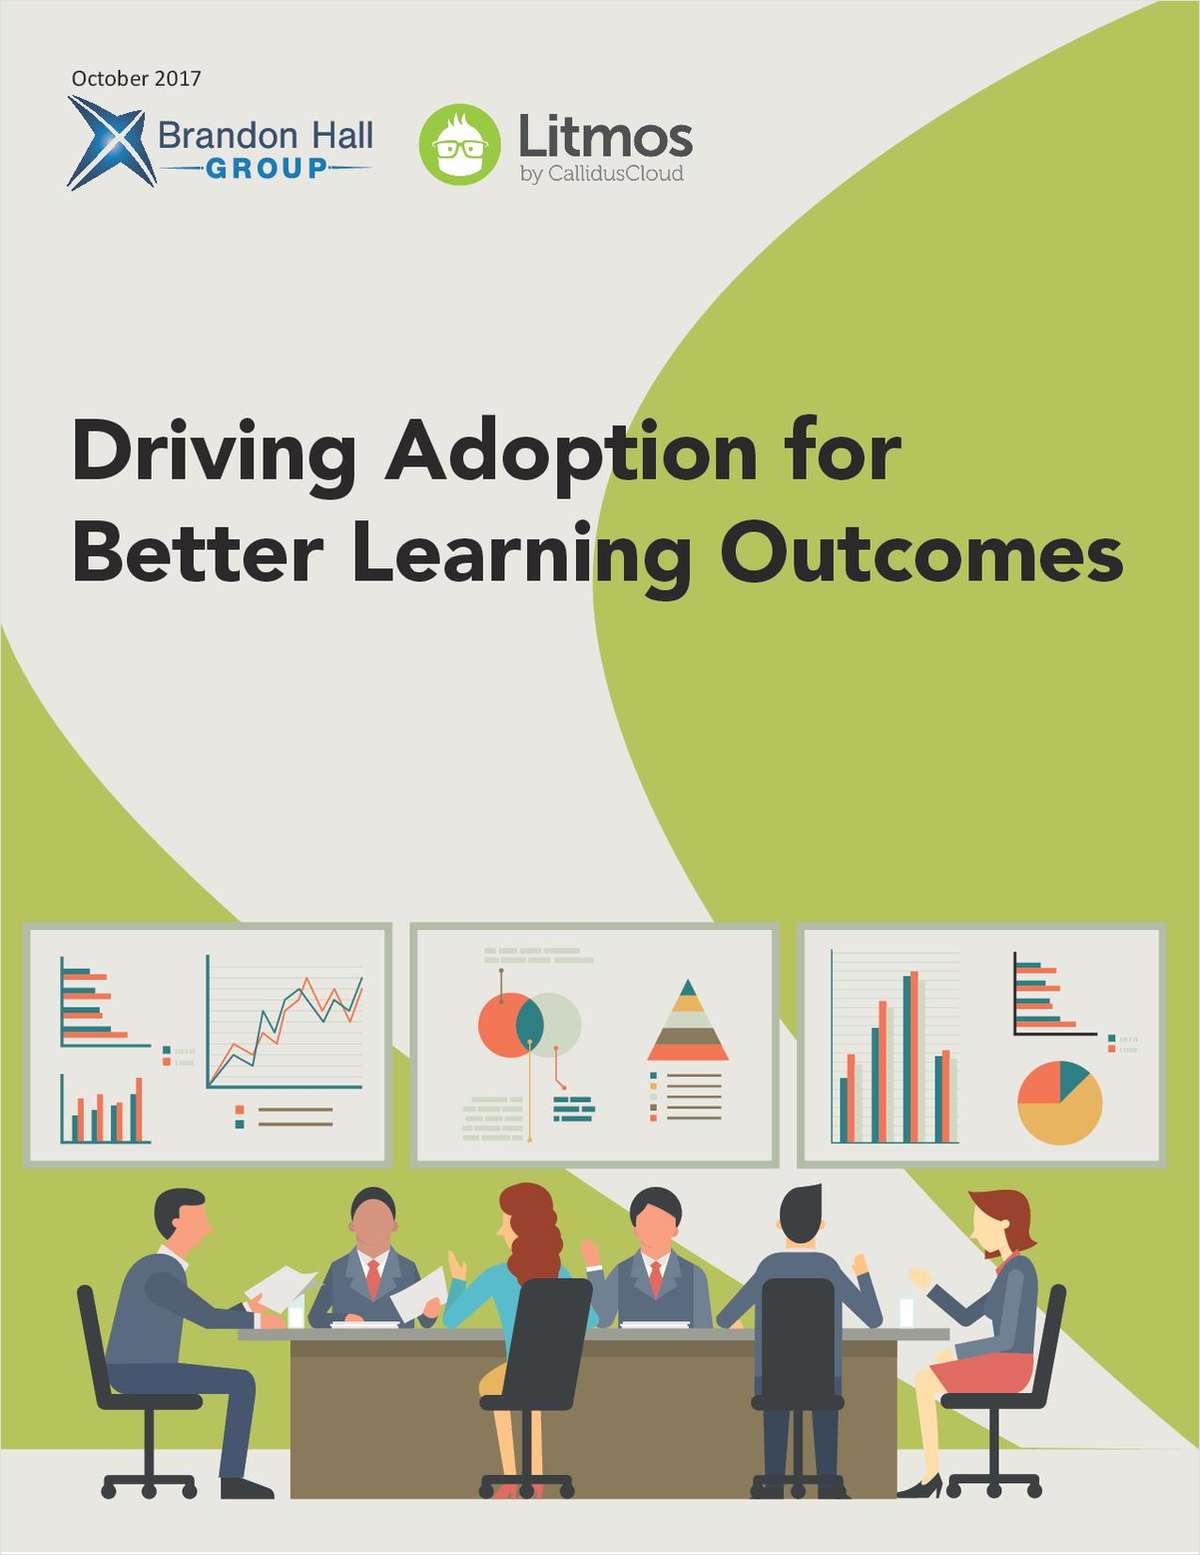 Driving Adoption for Better Learning Outcomes